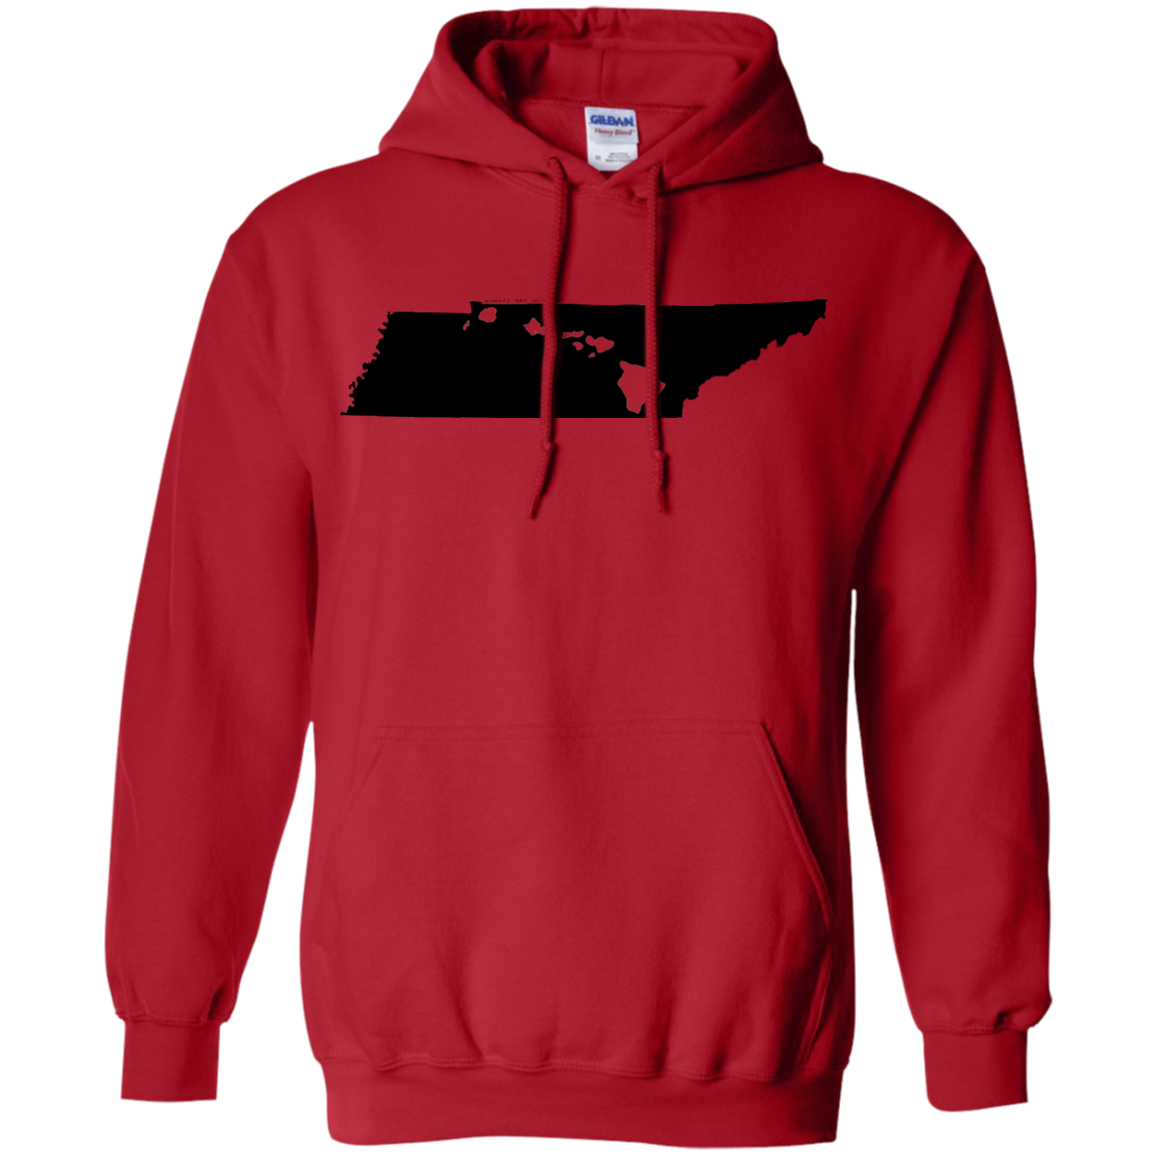 Living in Tennessee with Hawaii Roots Pullover Hoodie 8 oz., Sweatshirts, Hawaii Nei All Day